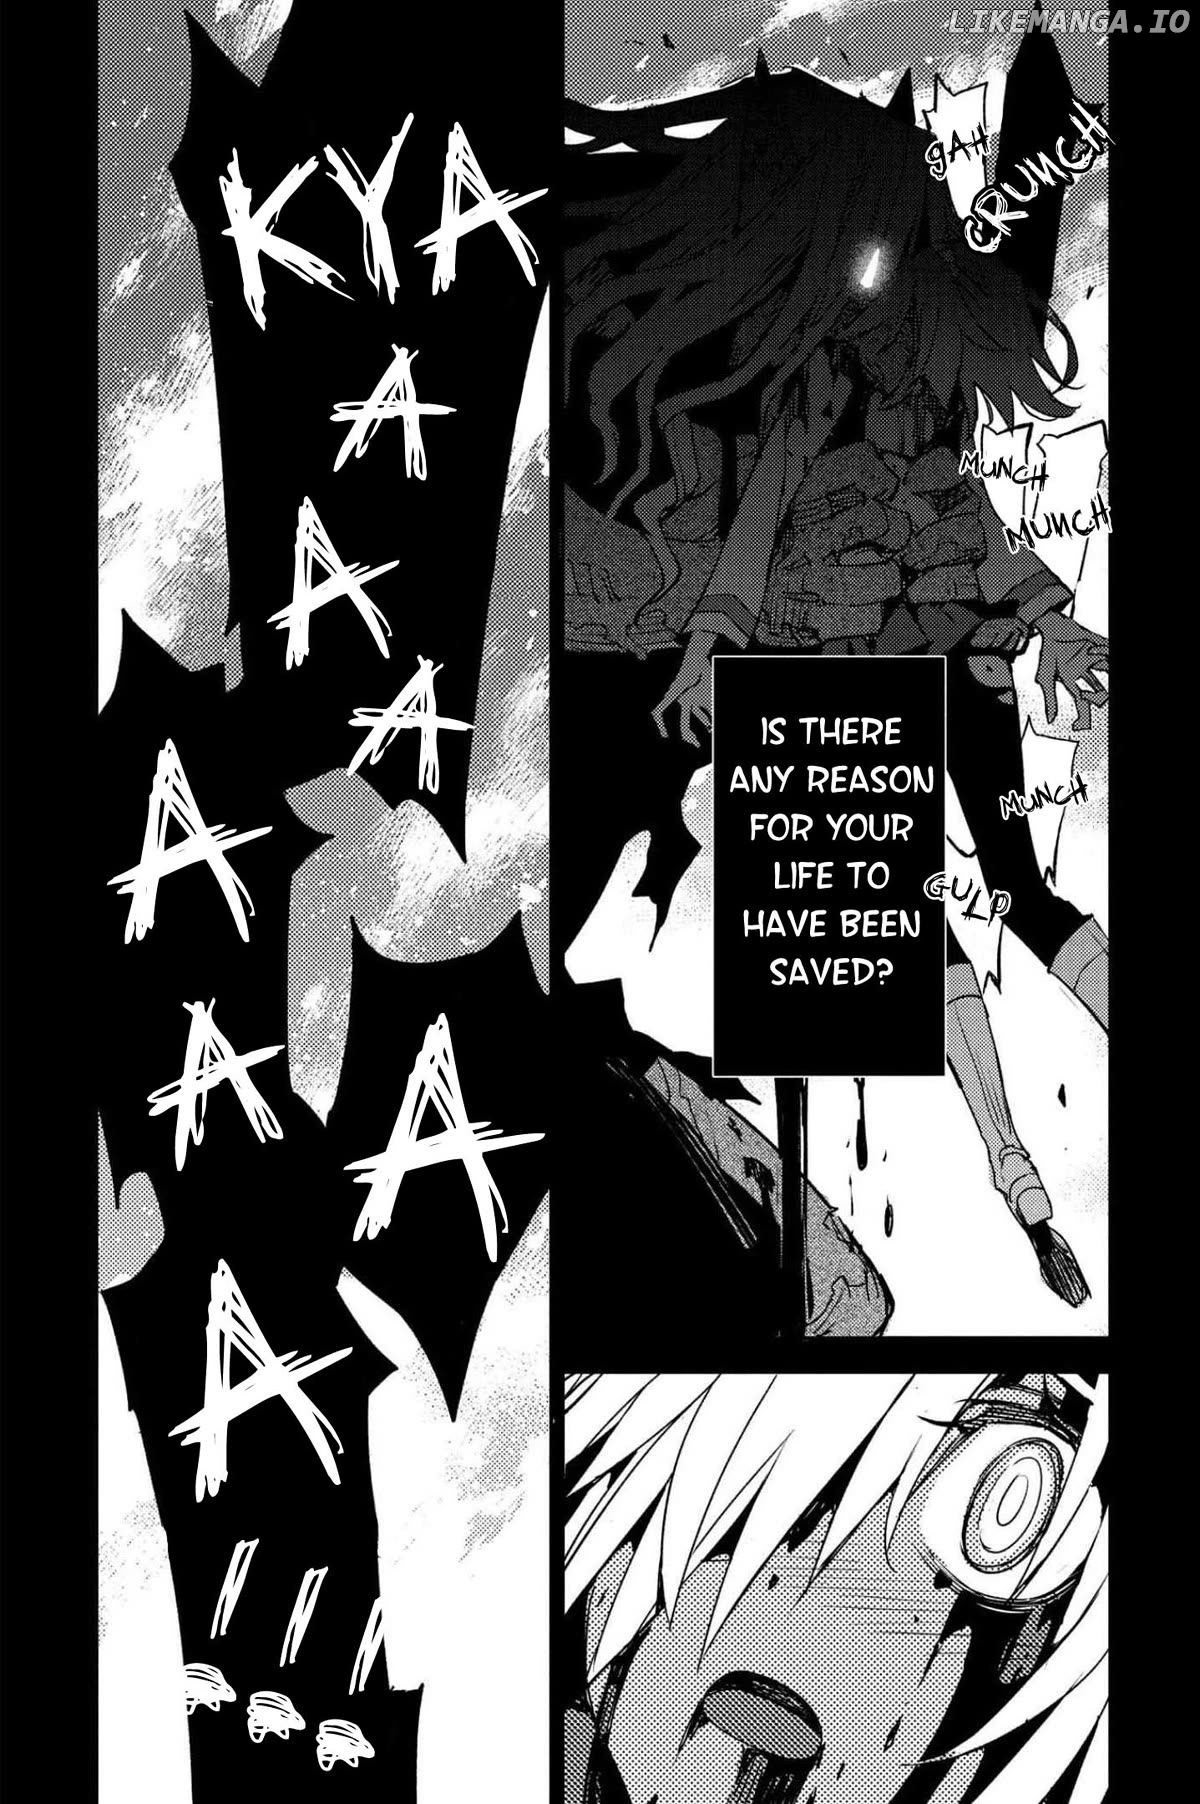 Fate/Grand Order: Epic of Remnant - Subspecies Singularity IV: Taboo Advent Salem: Salem of Heresy Chapter 26 - page 5